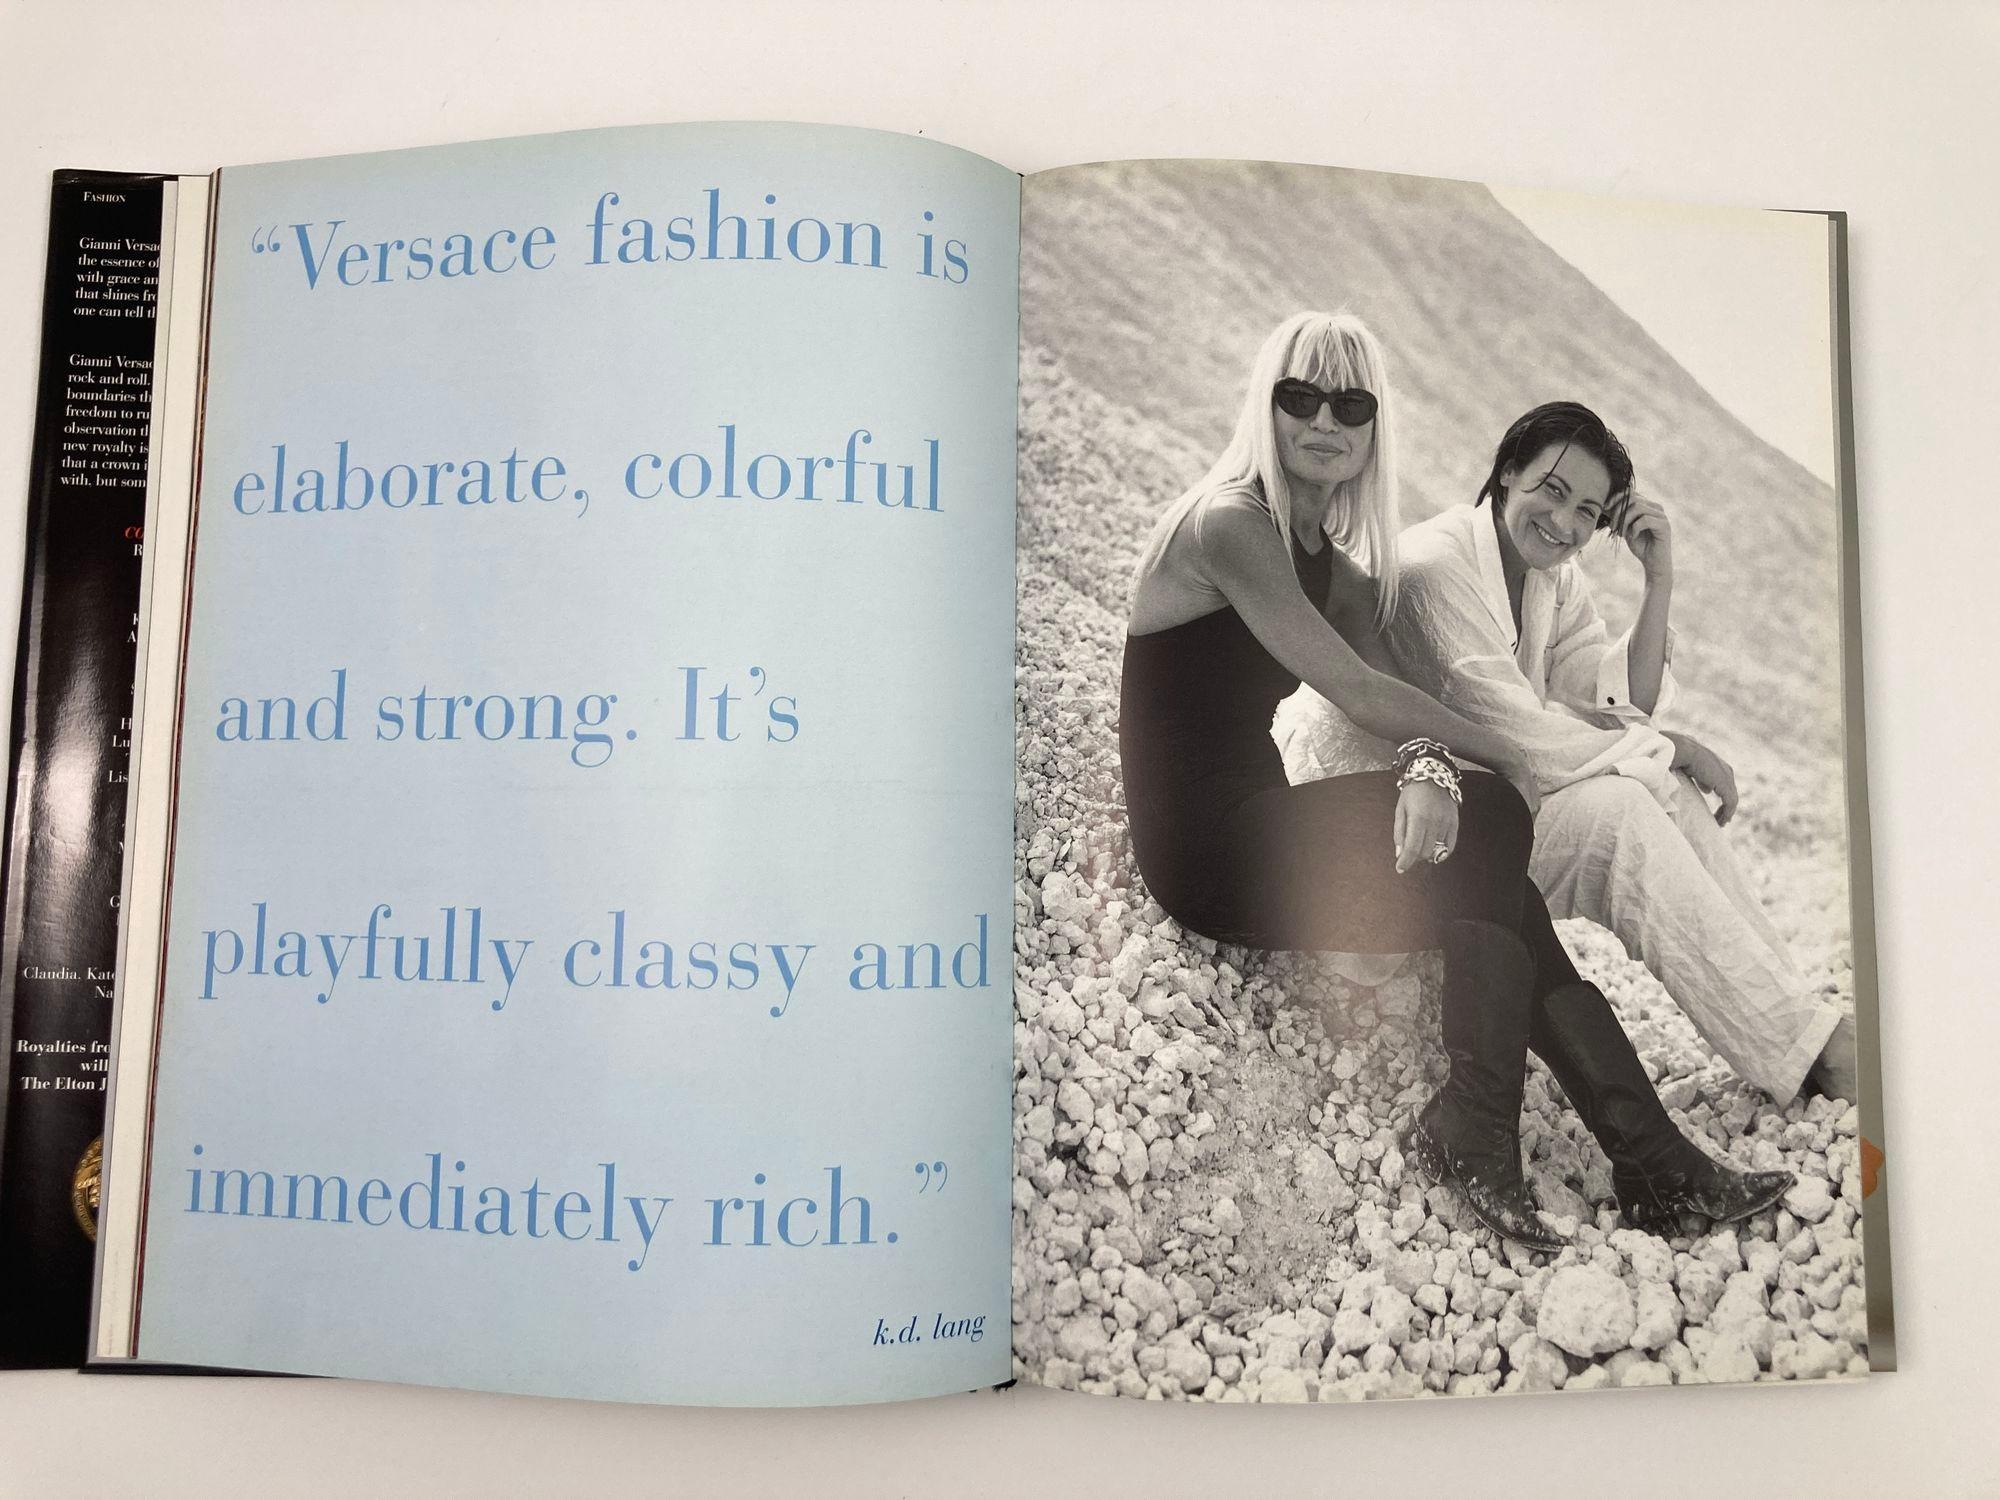 20th Century Rock and Royalty Gianni Versace Hardcover Table Book 1st Ed. Large Format For Sale